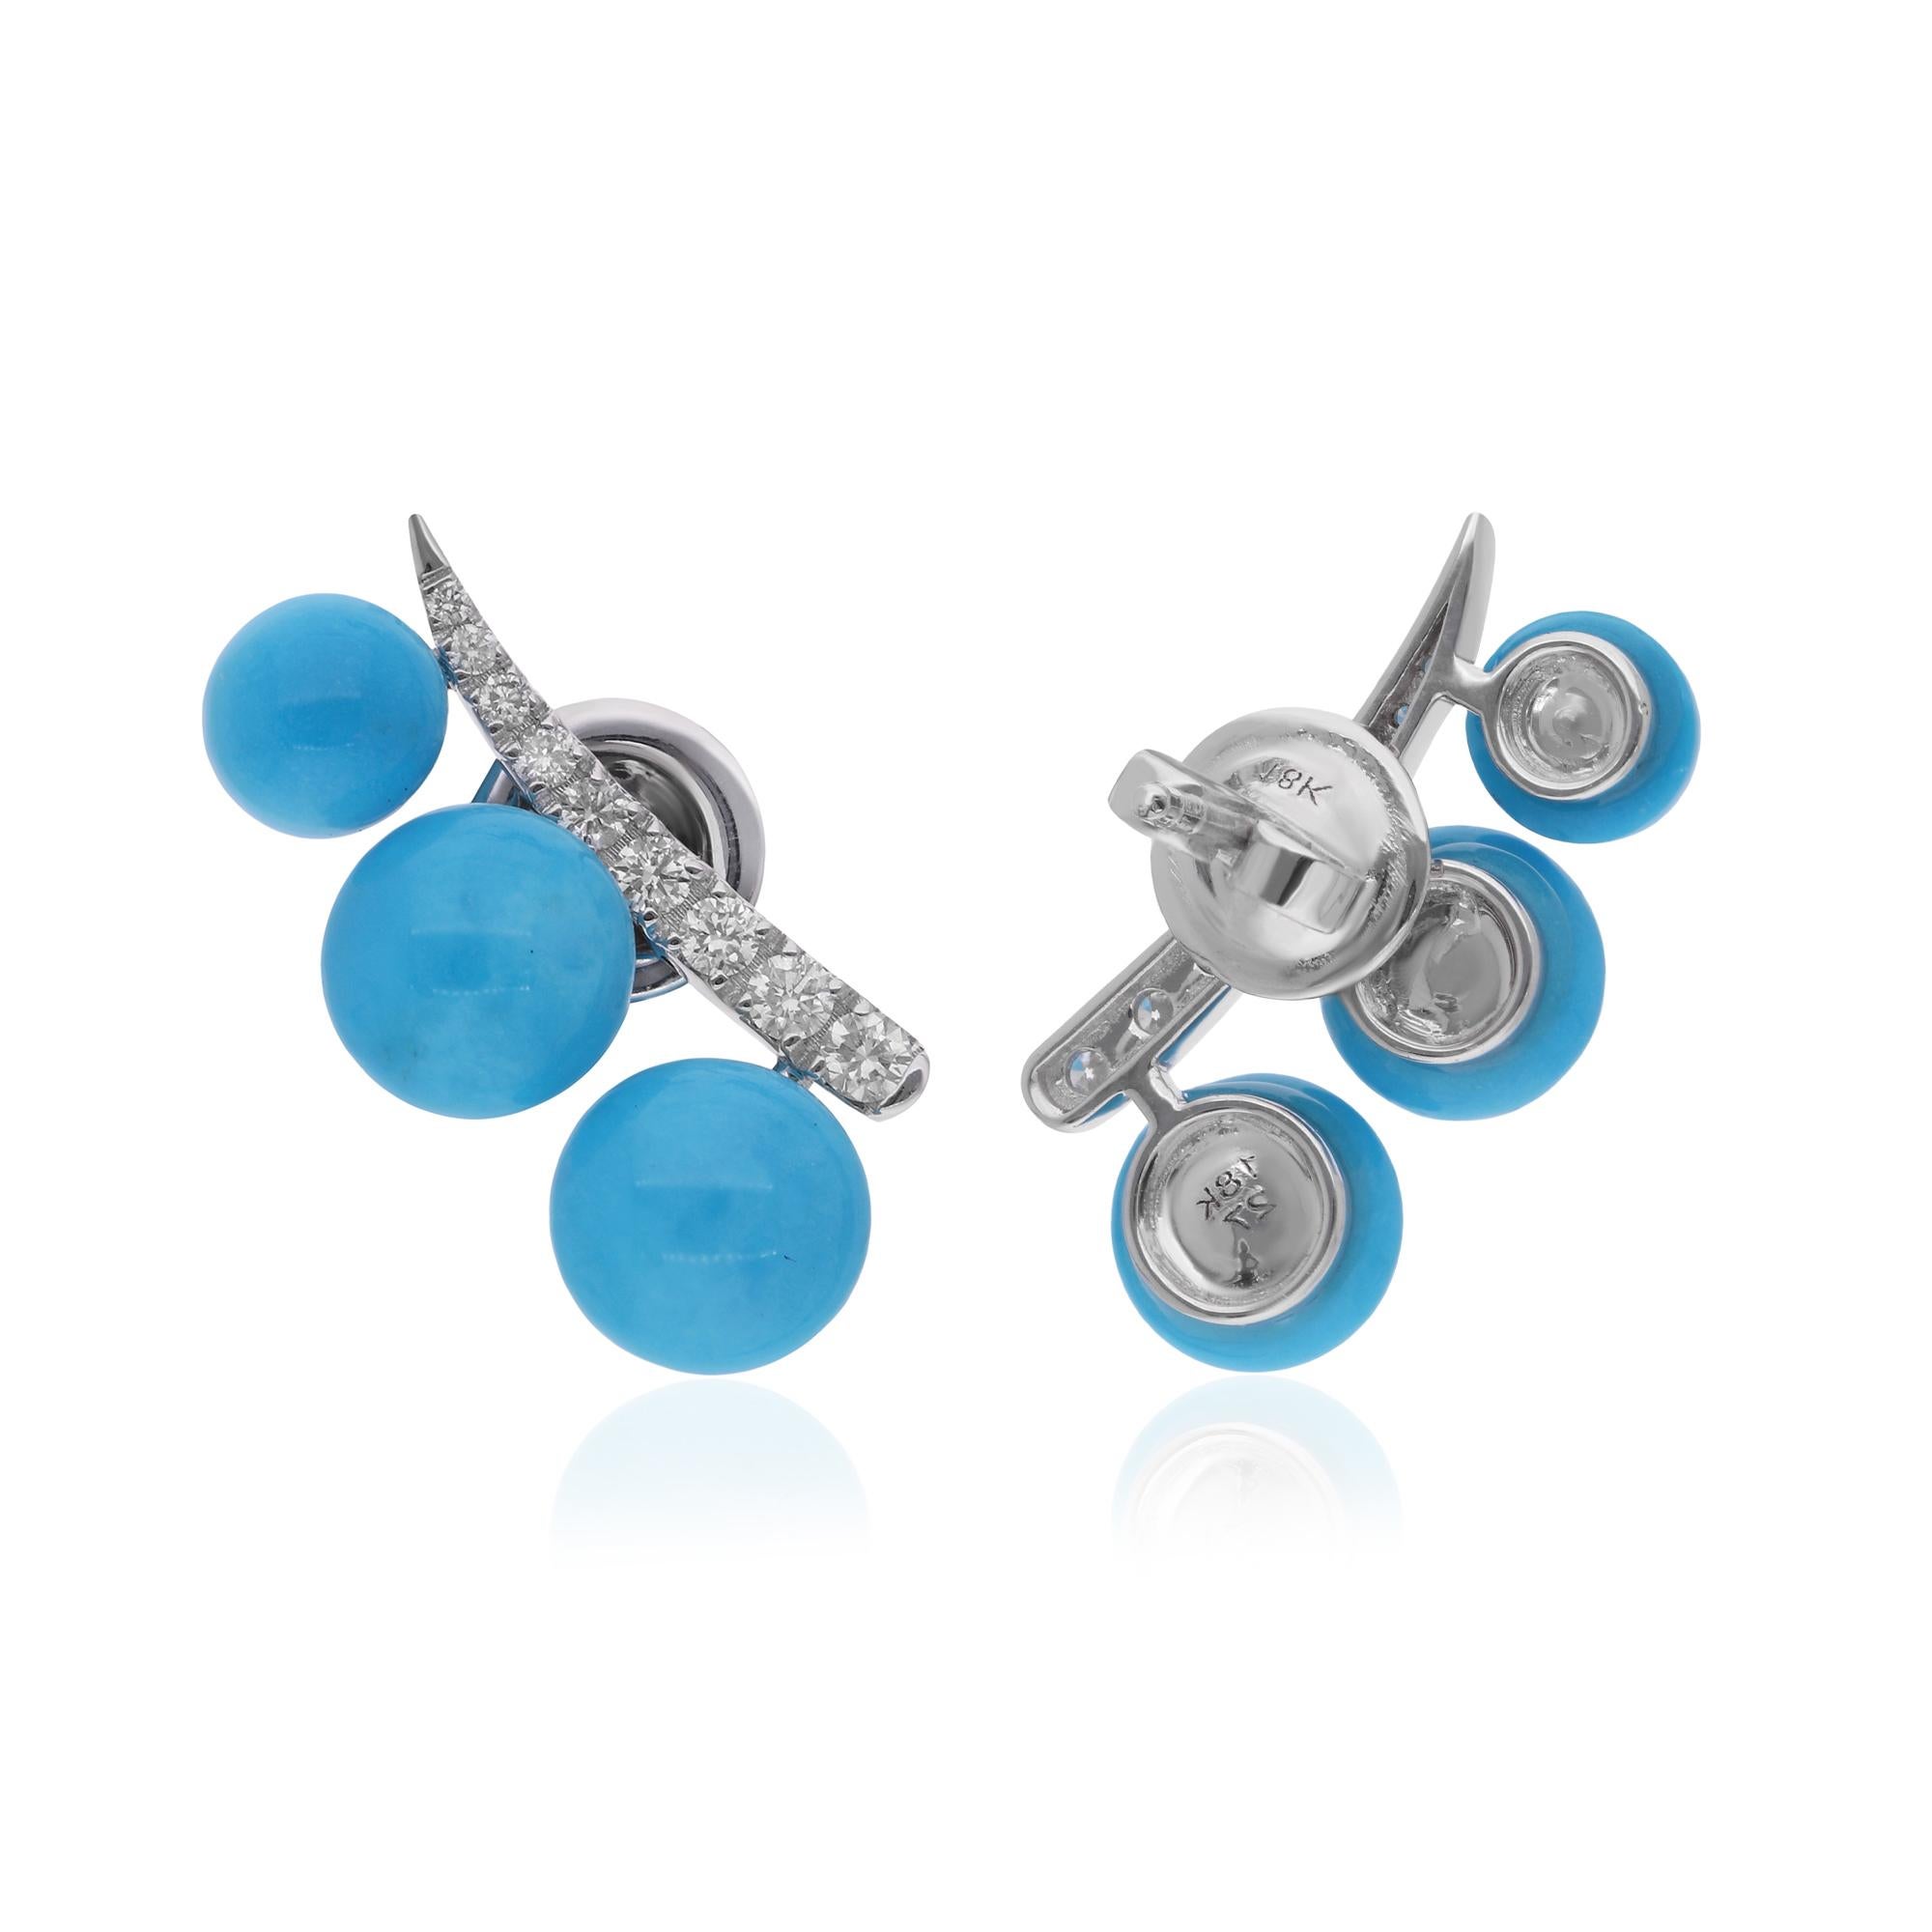 Adorn your ears with the enchanting beauty of these Natural Turquoise Gemstone Ear Climber Fine Earrings, elegantly accented with Diamonds and crafted in luxurious 14 Karat White Gold. Radiating a sense of timeless elegance and sophistication, these